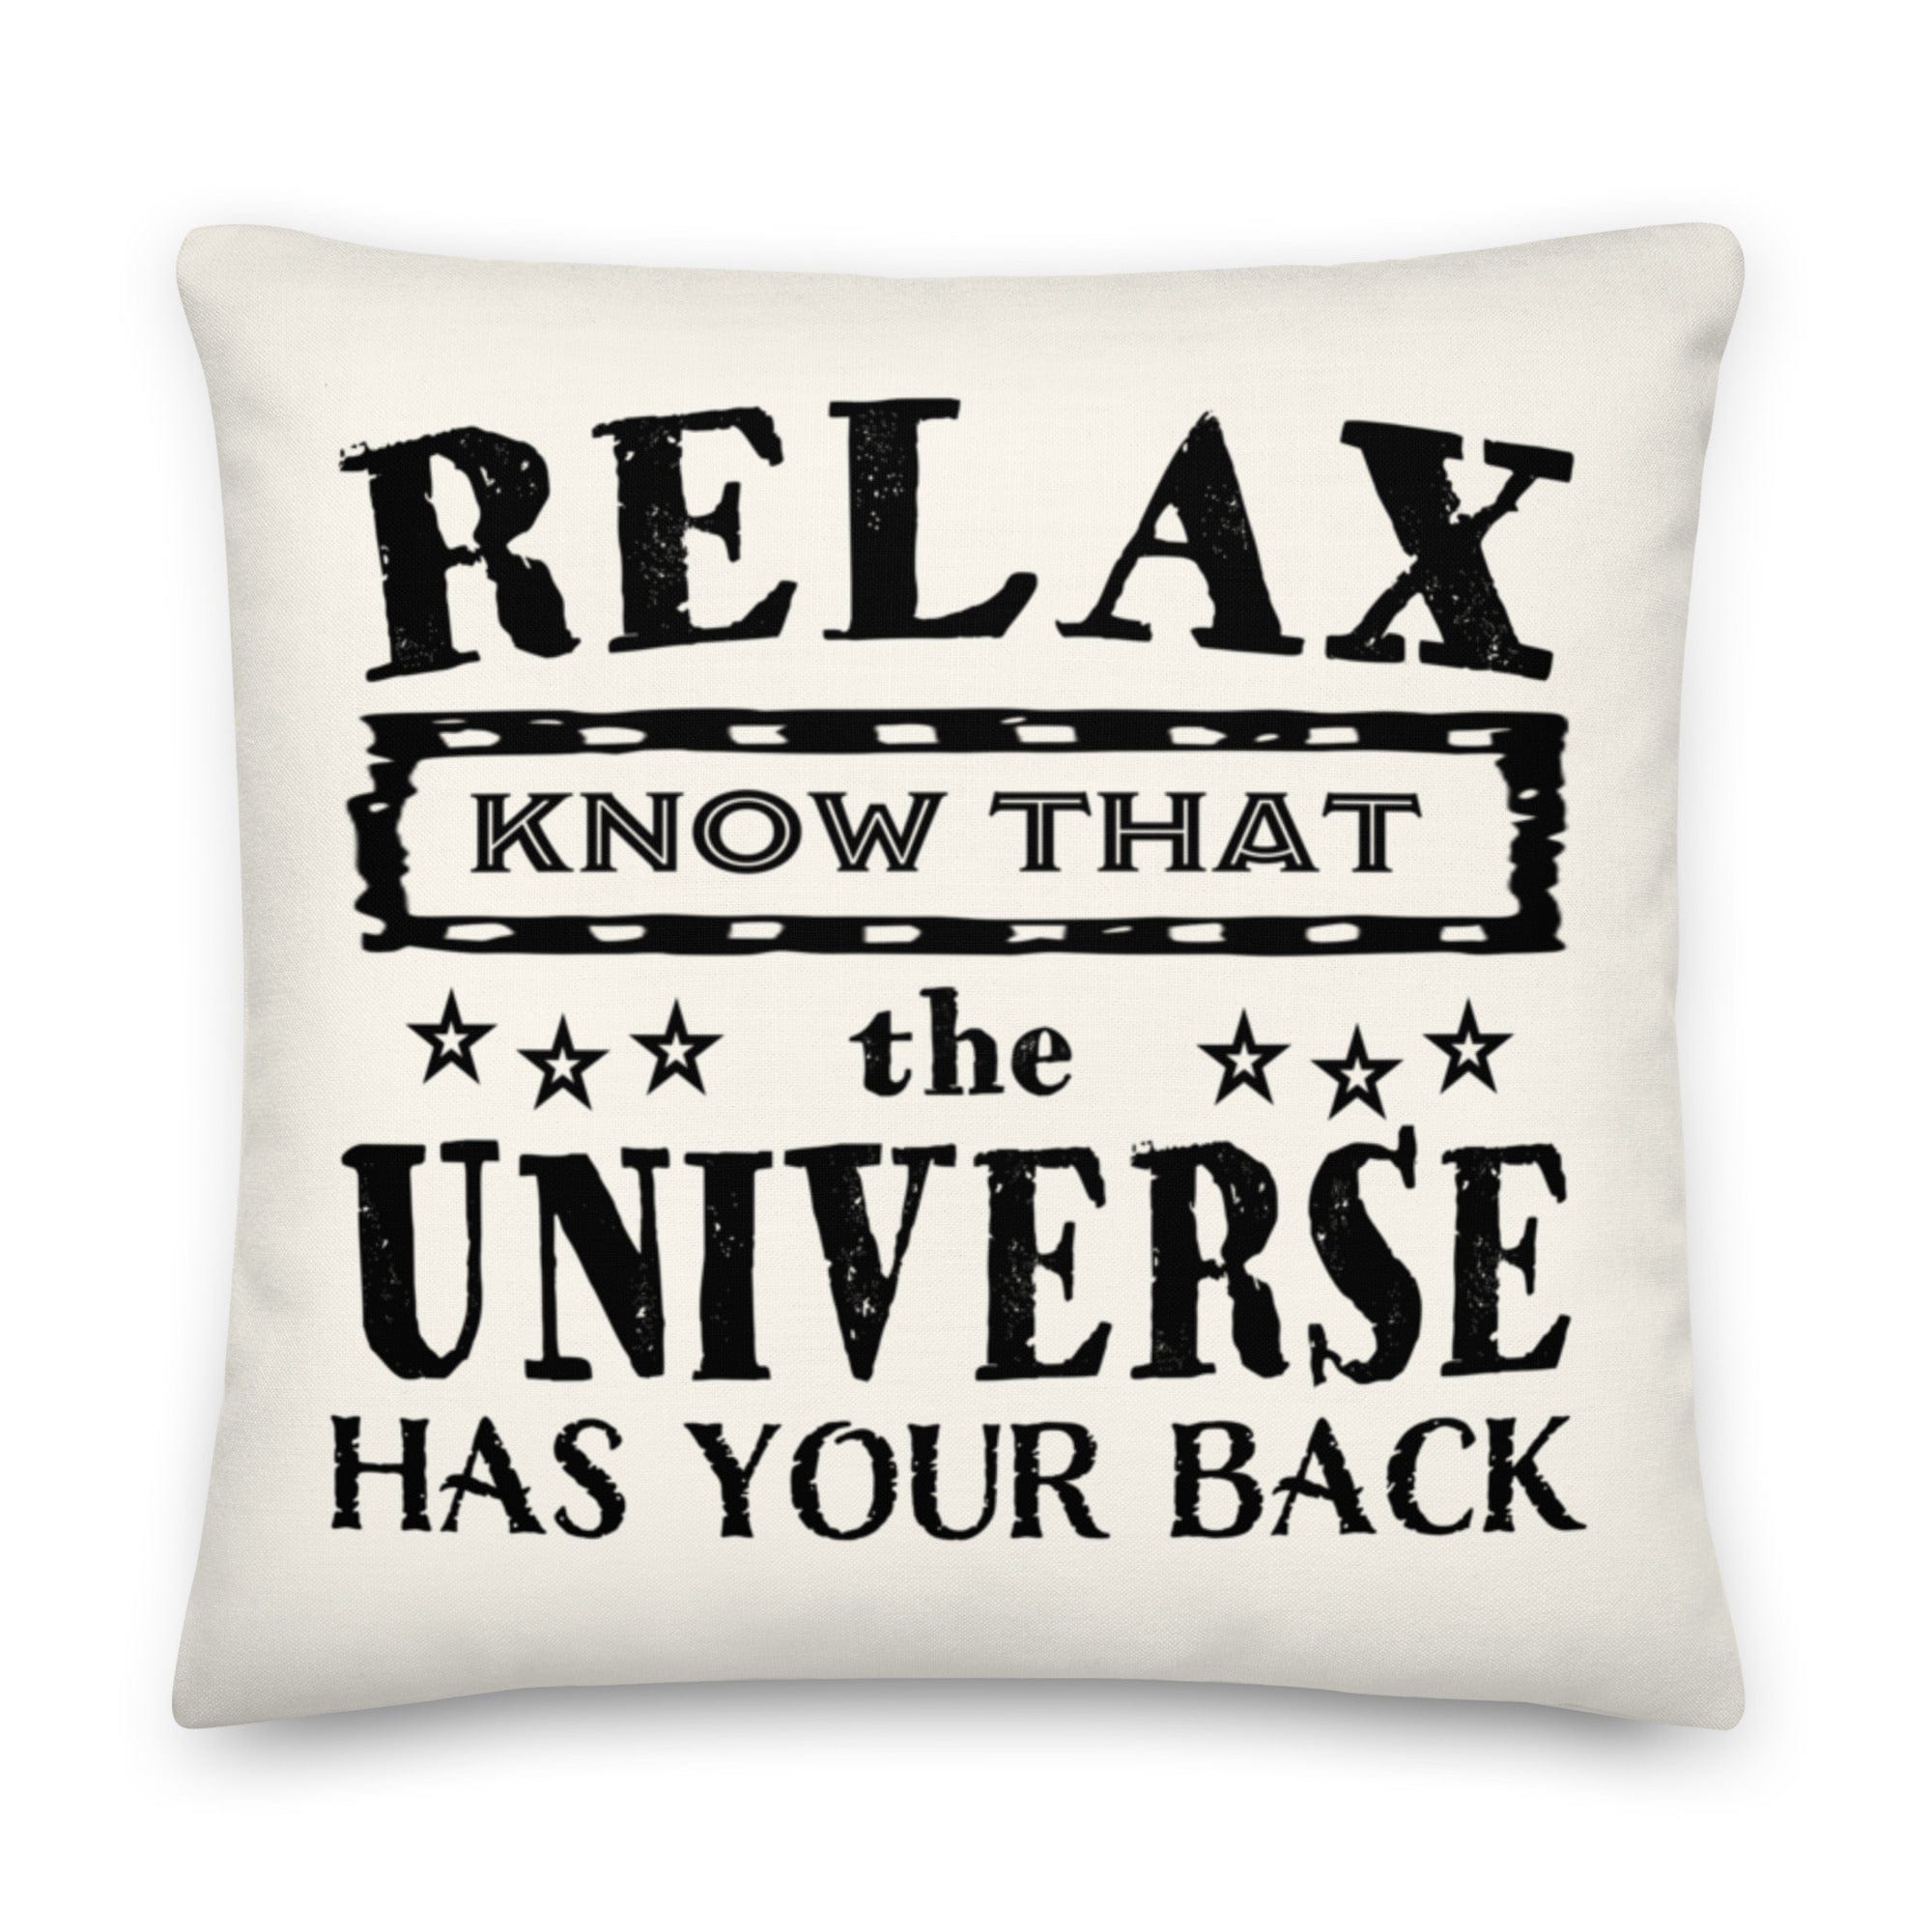 The Universe Has Your Back Inspirational Quote Accent Pillow Throw Pillows A Moment Of Now Women’s Boutique Clothing Online Lifestyle Store